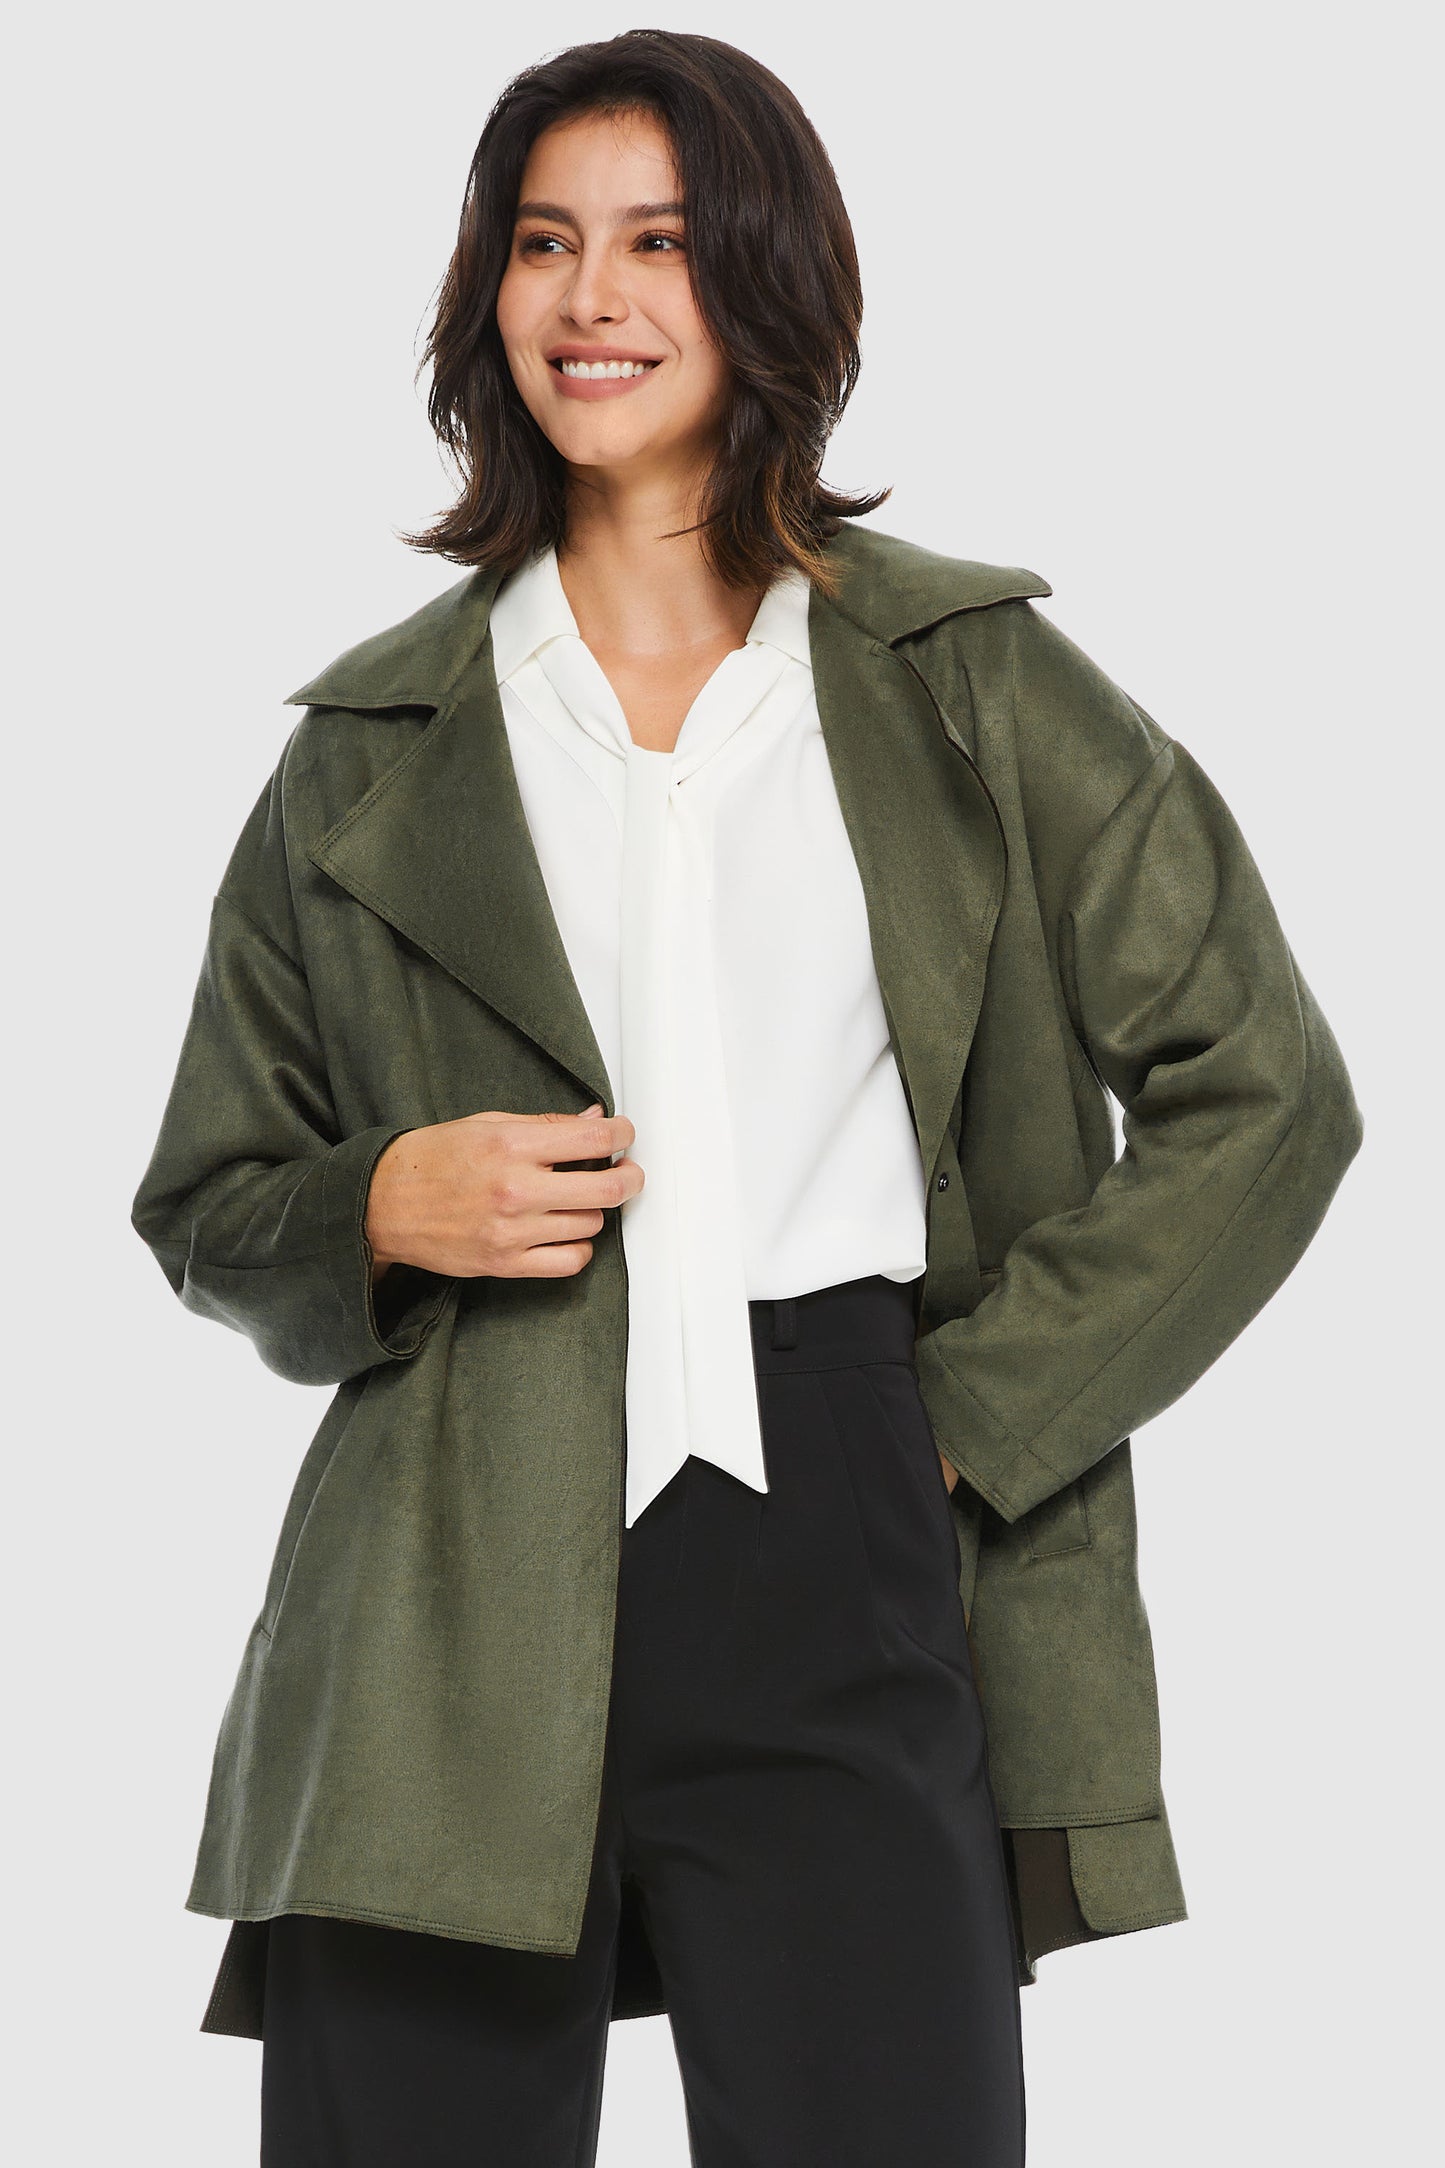 Stylish Faux Suede Lightweight Trench Coat